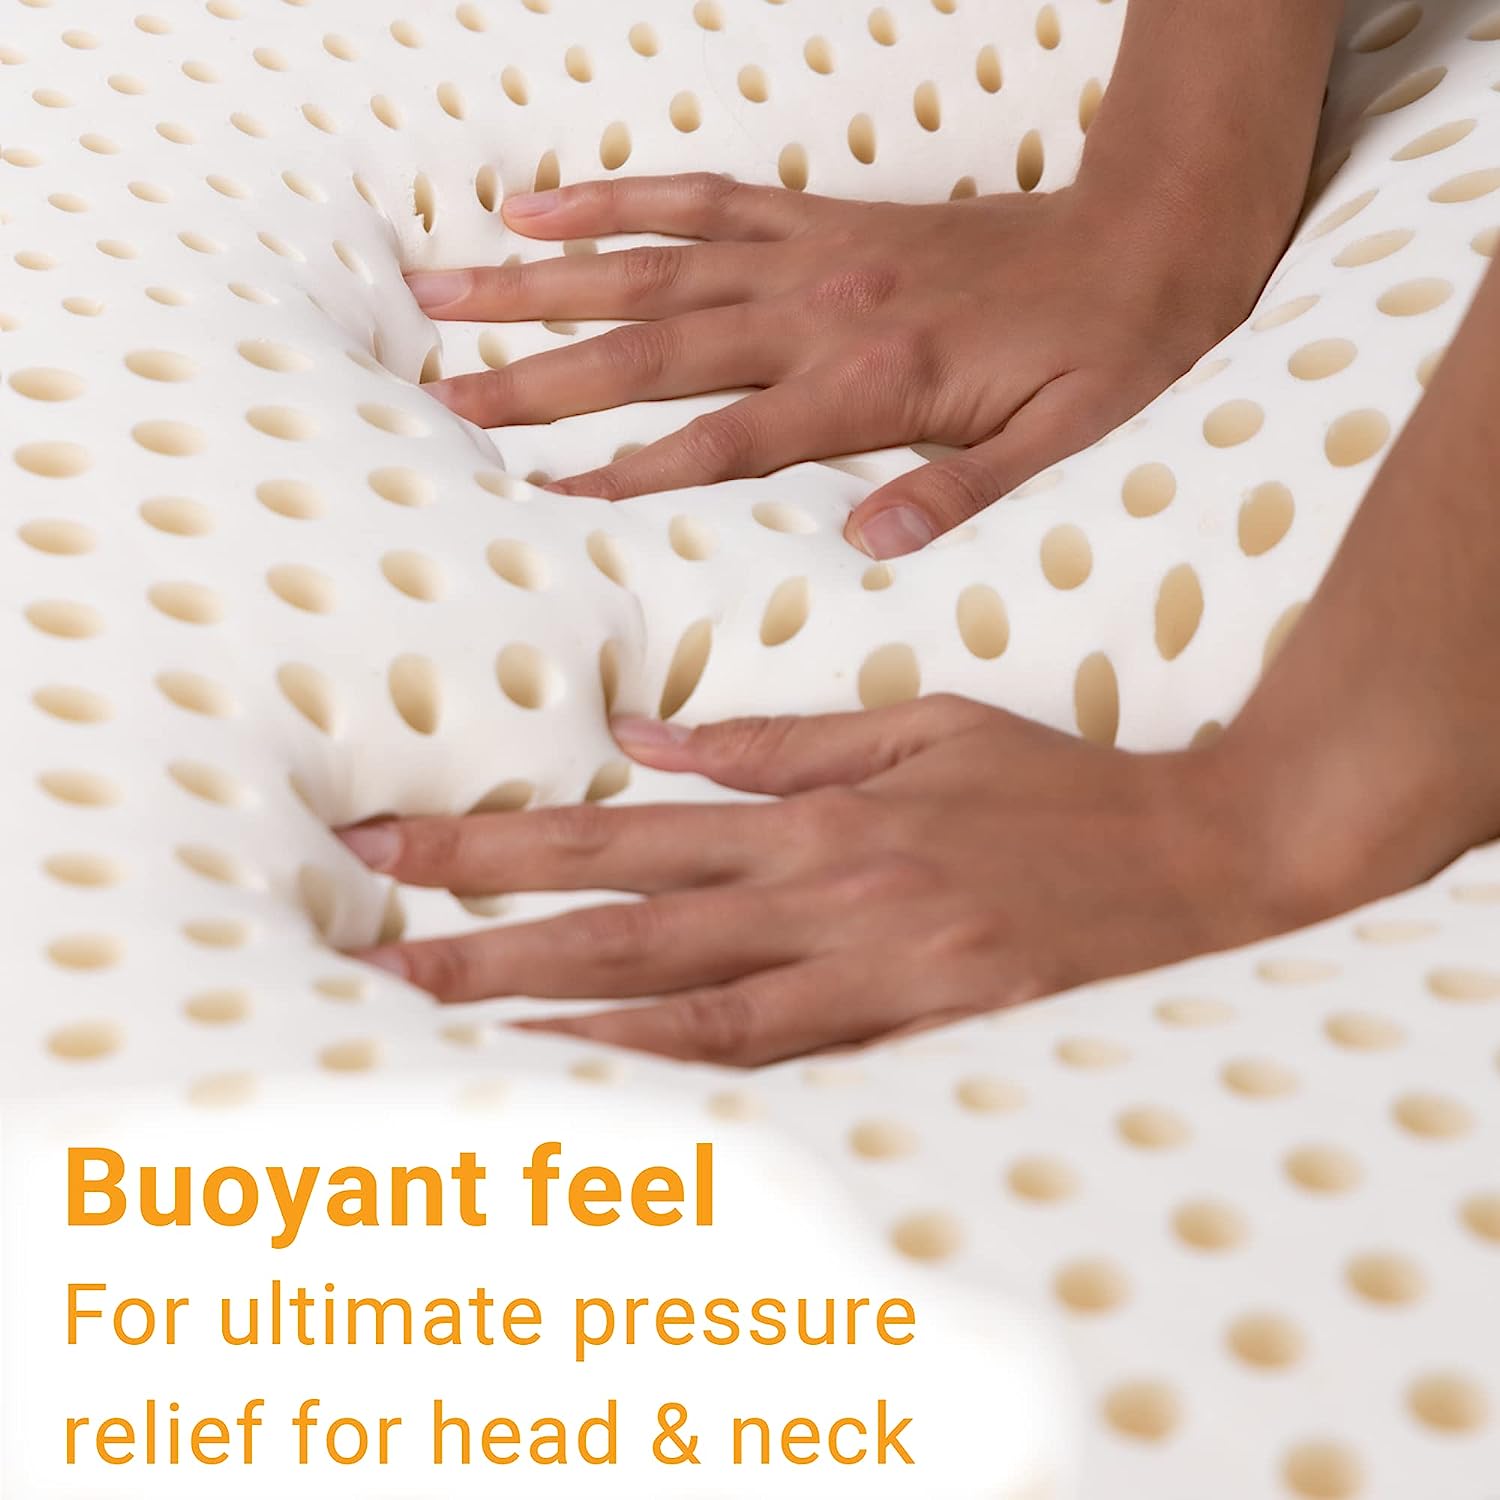 Buoyant feel, hands squishing a juvea pillow